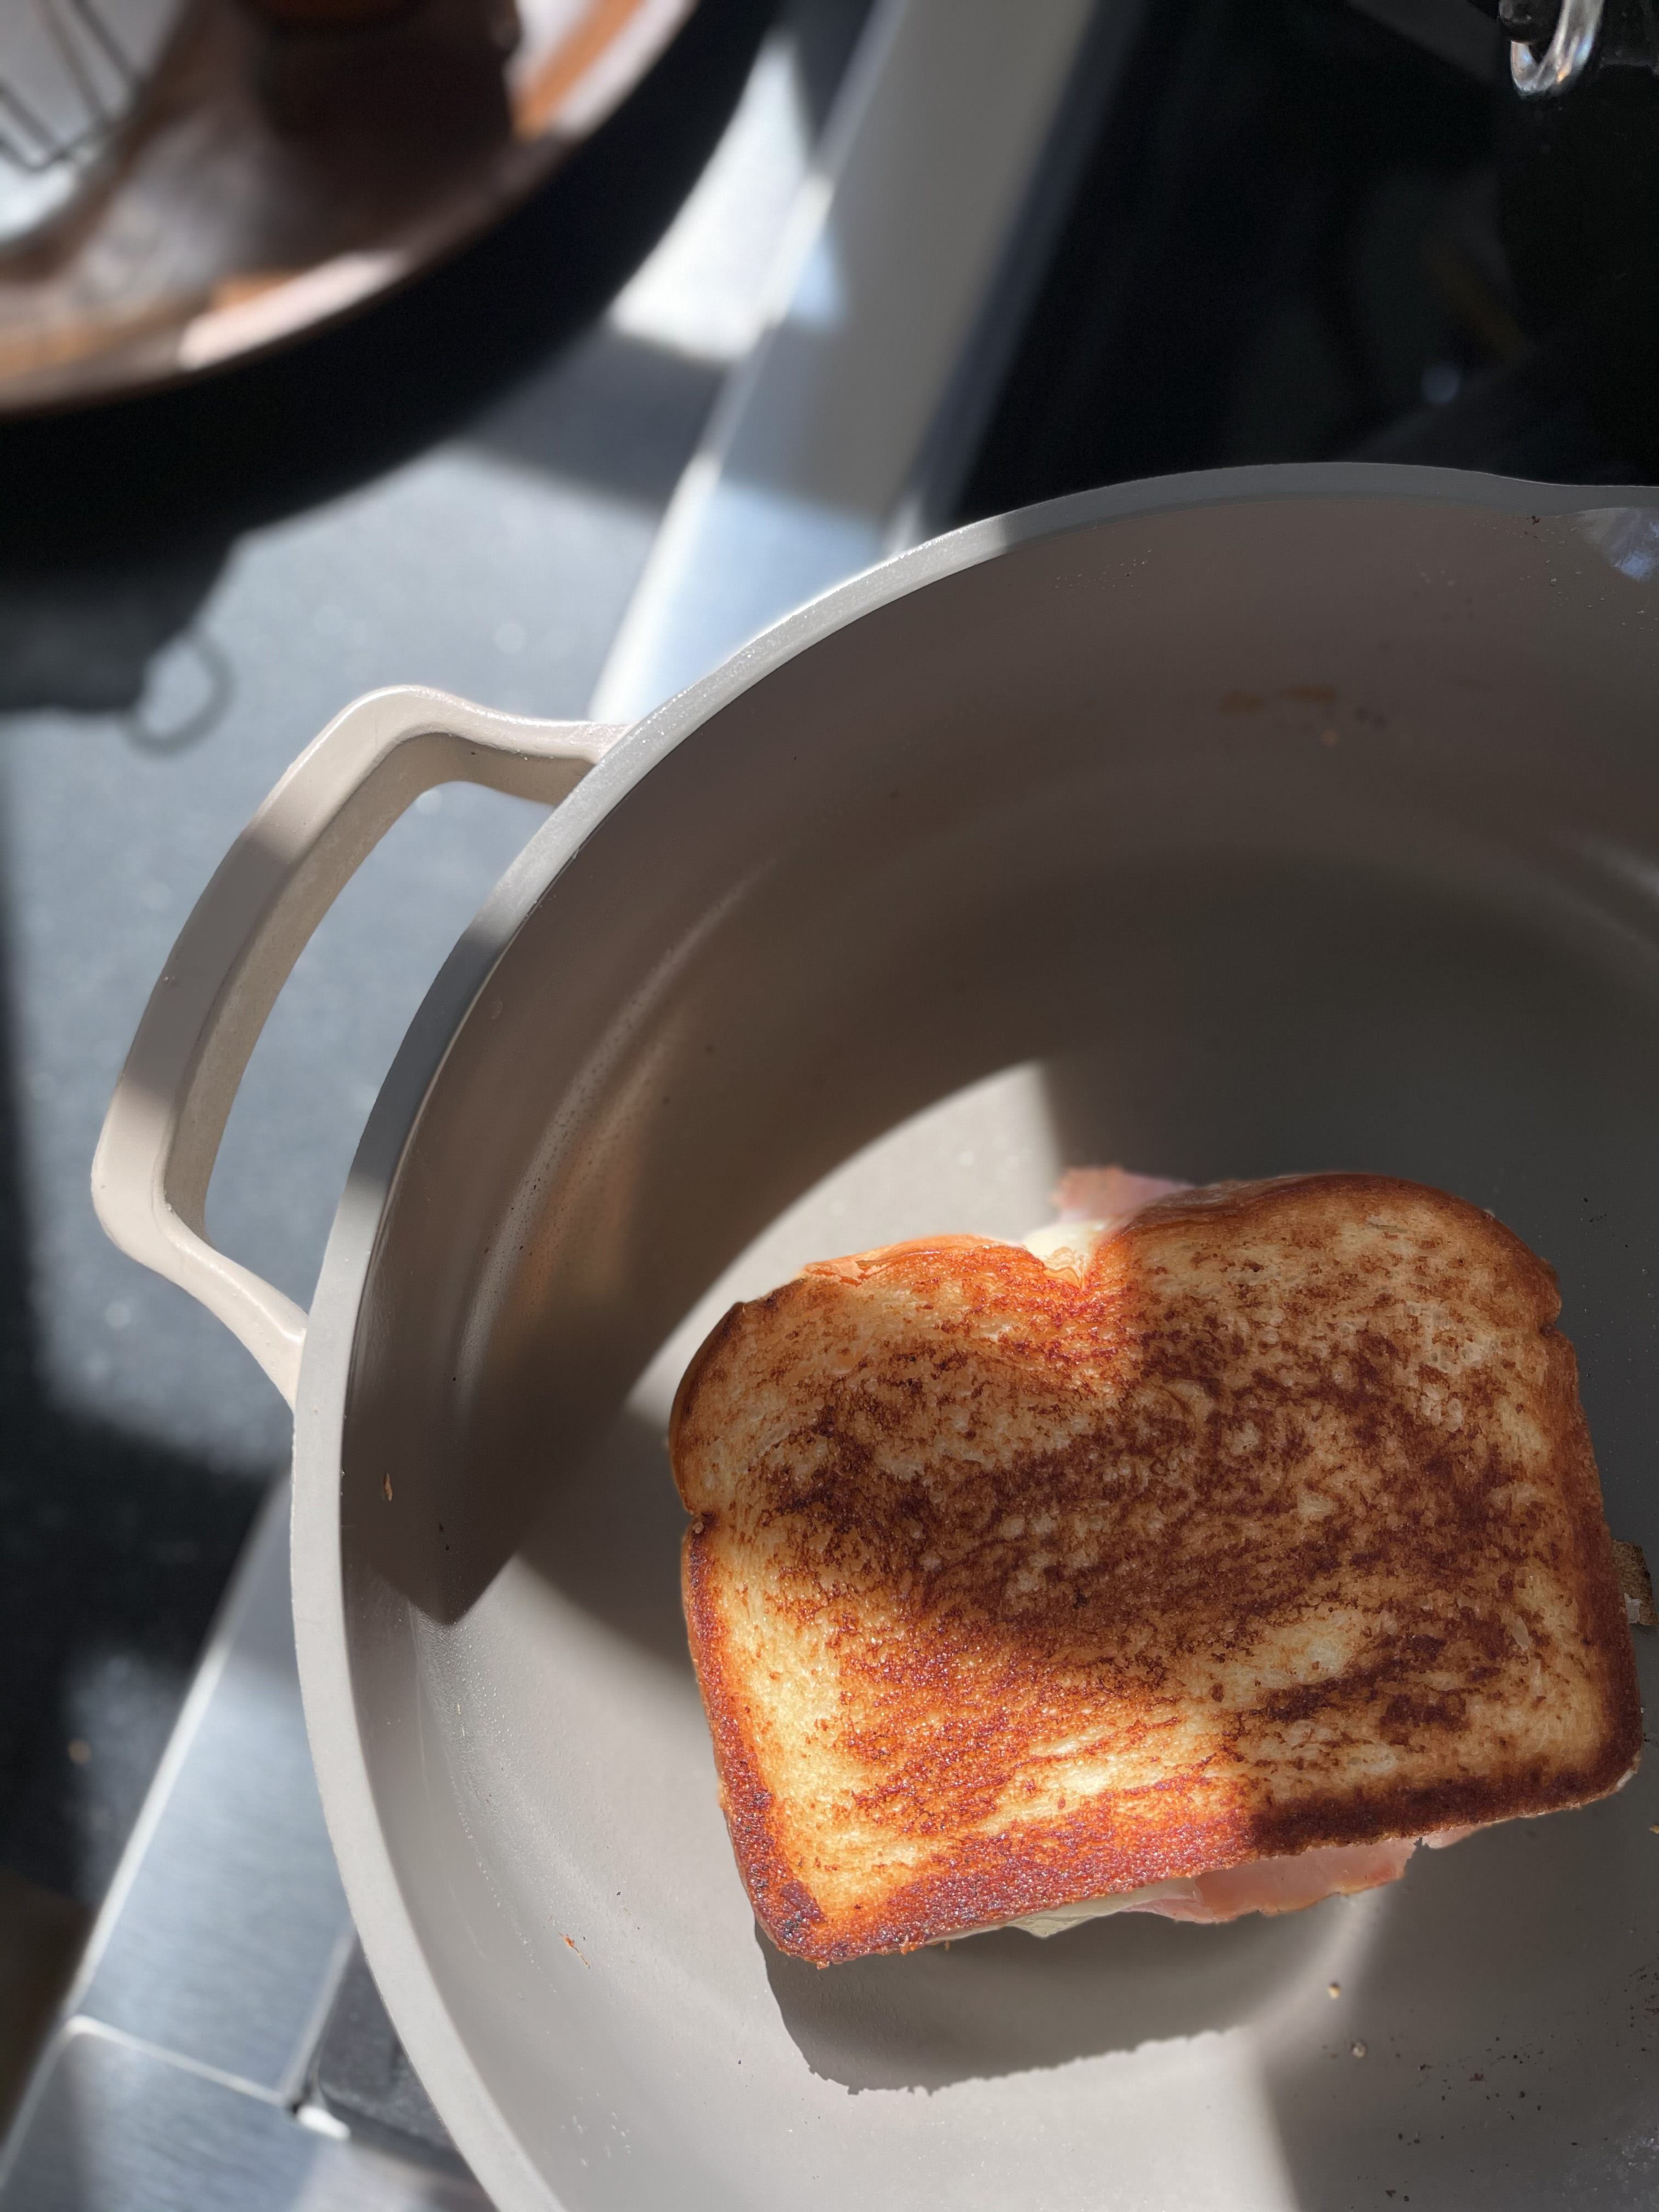 The Always Pan from Our Place is perfect for busy moms making grilled cheese sandwiches at lunchtime